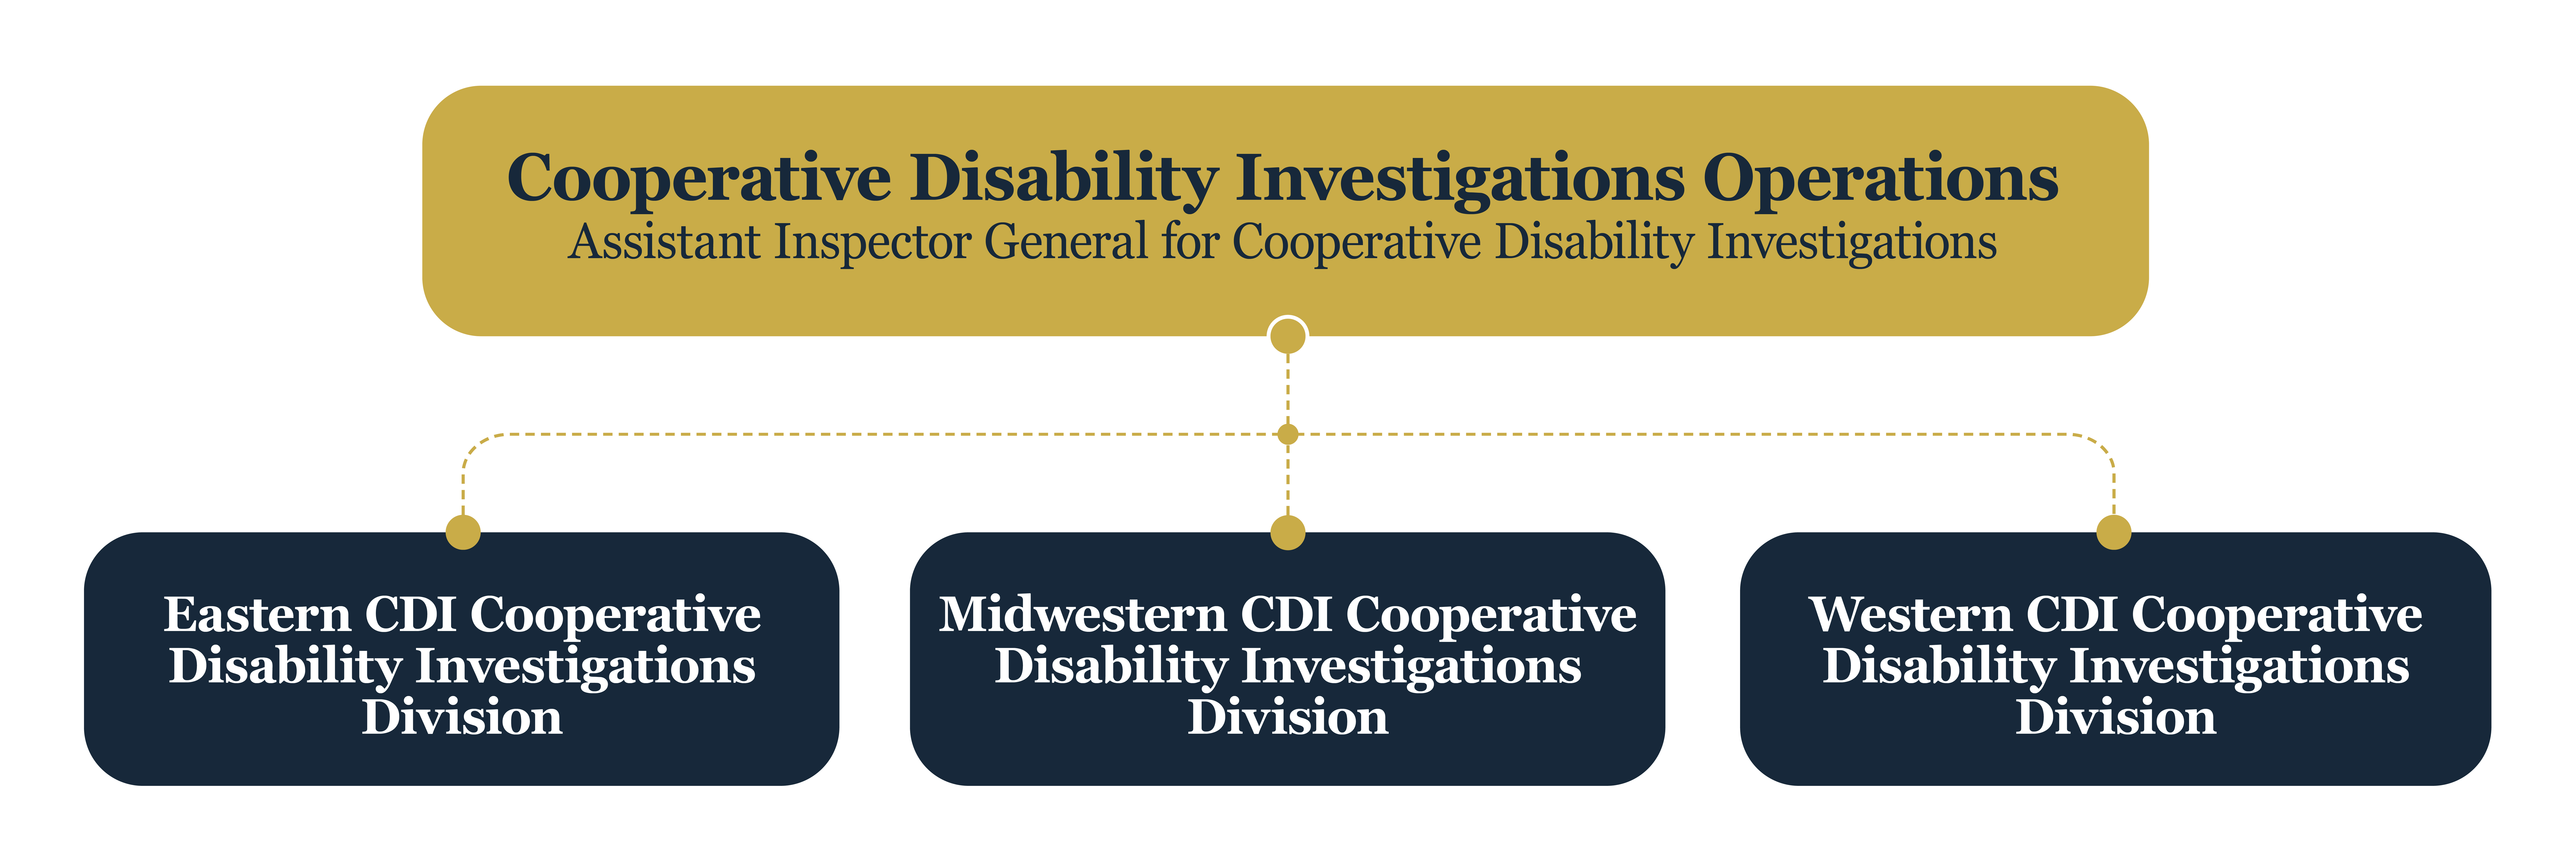 cooperative disability investigations operations